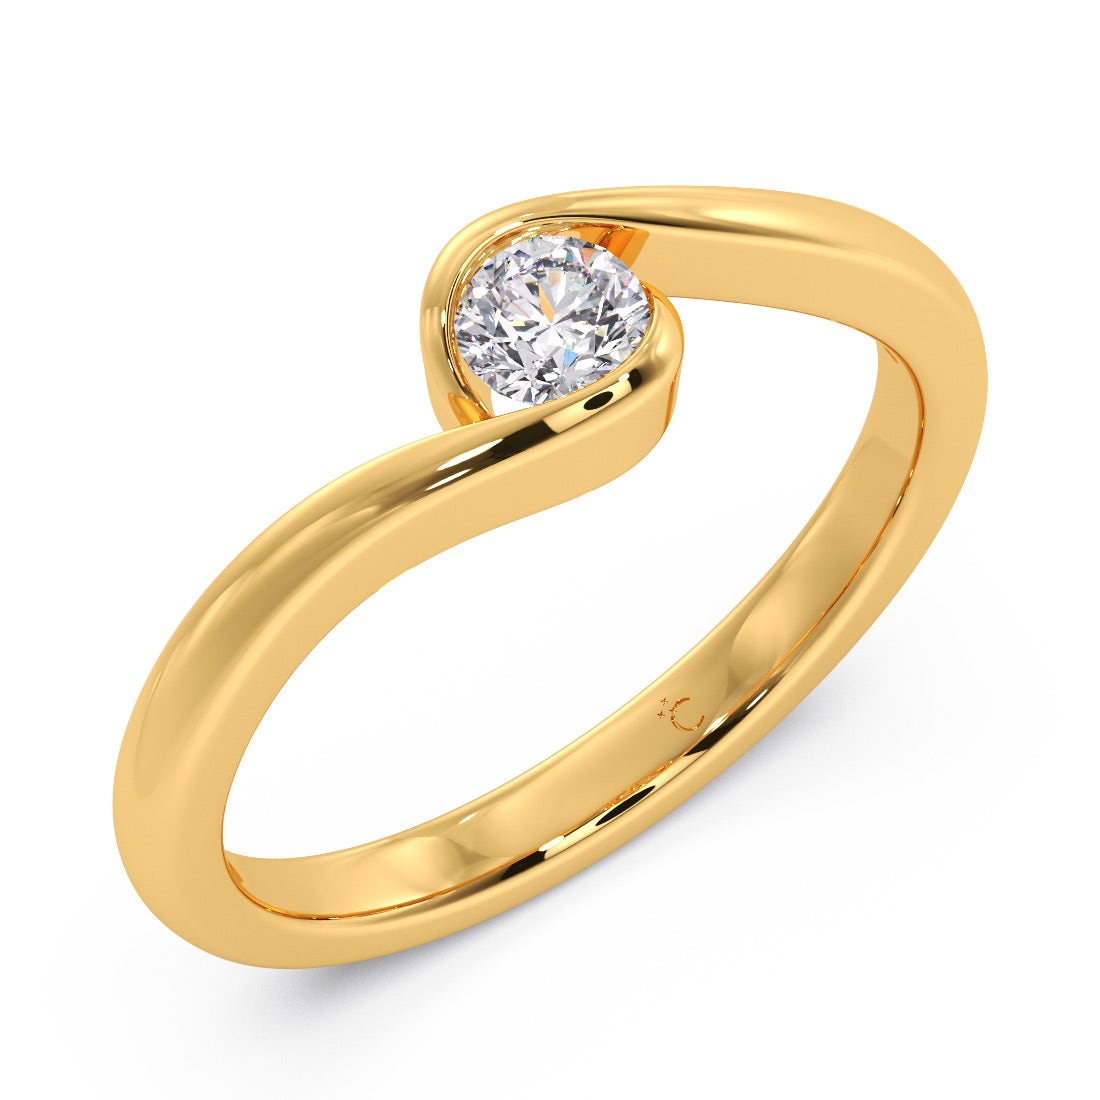 Aakruthi Solitaire Diamond Ring